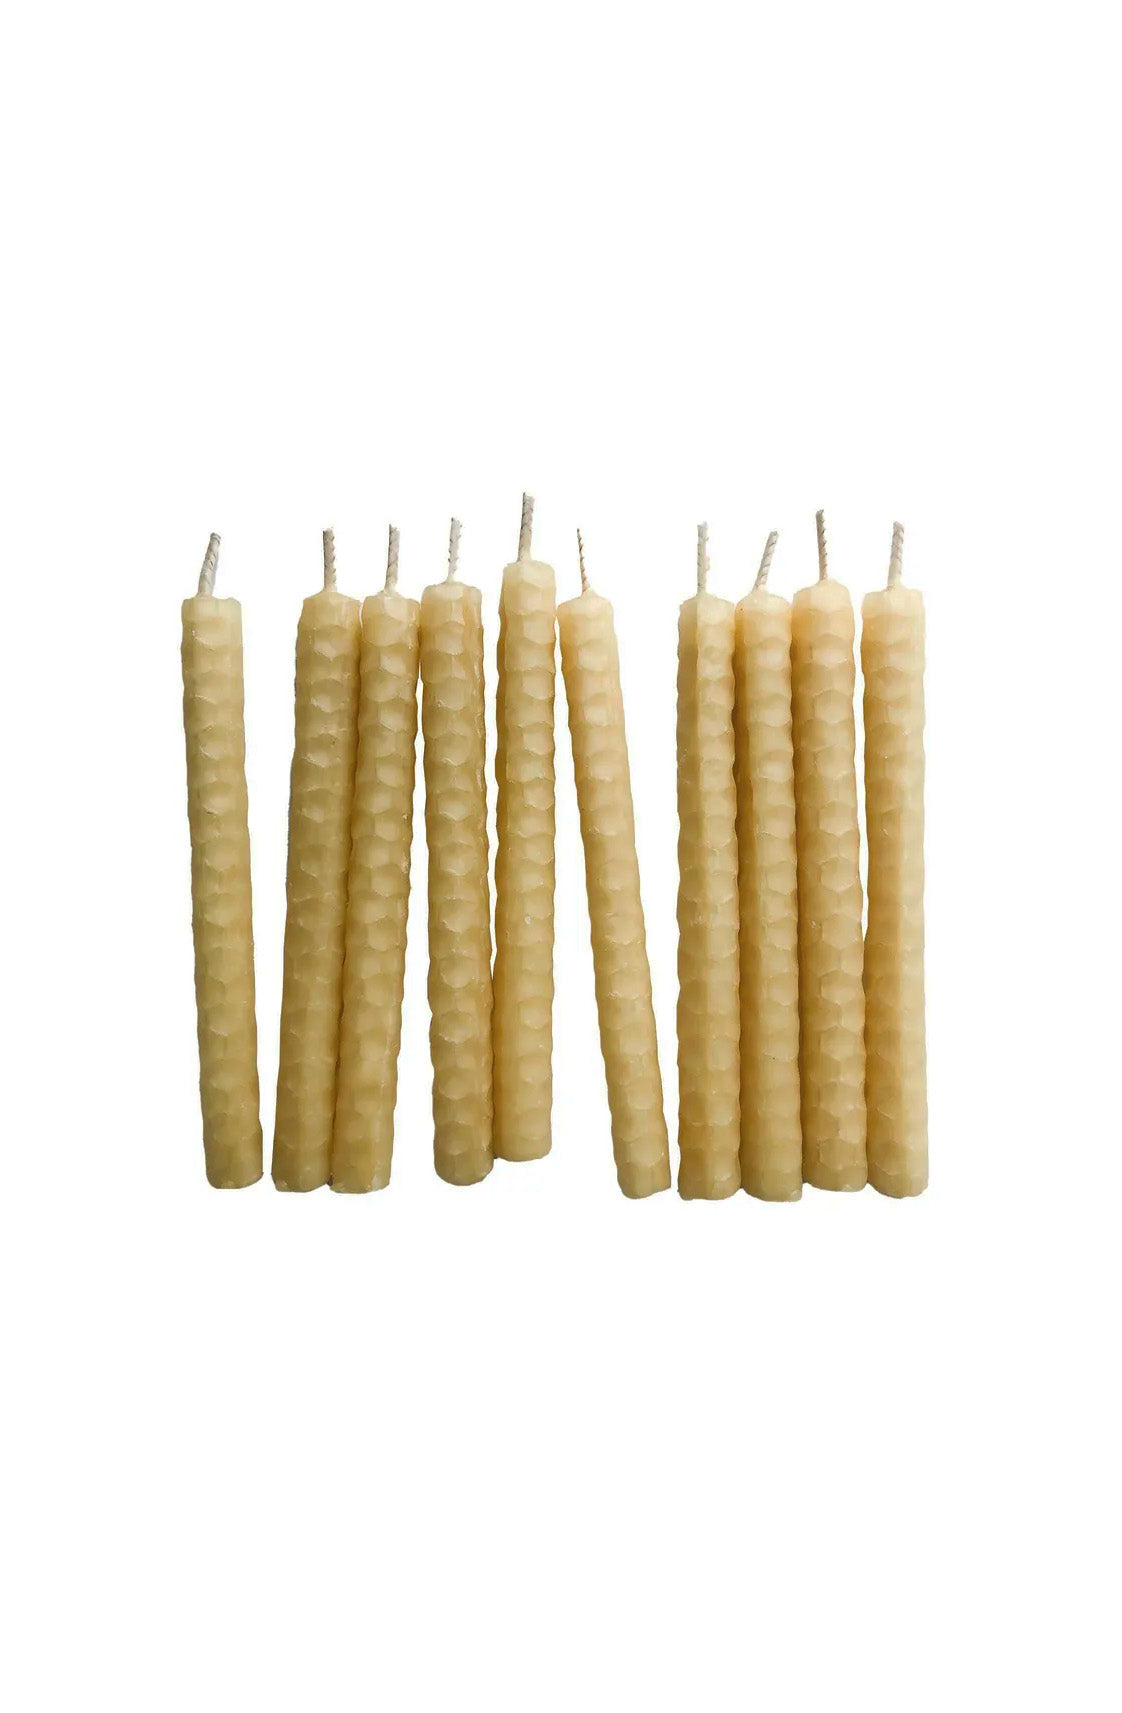 Australian Beeswax Birthday Candles Pack of 5